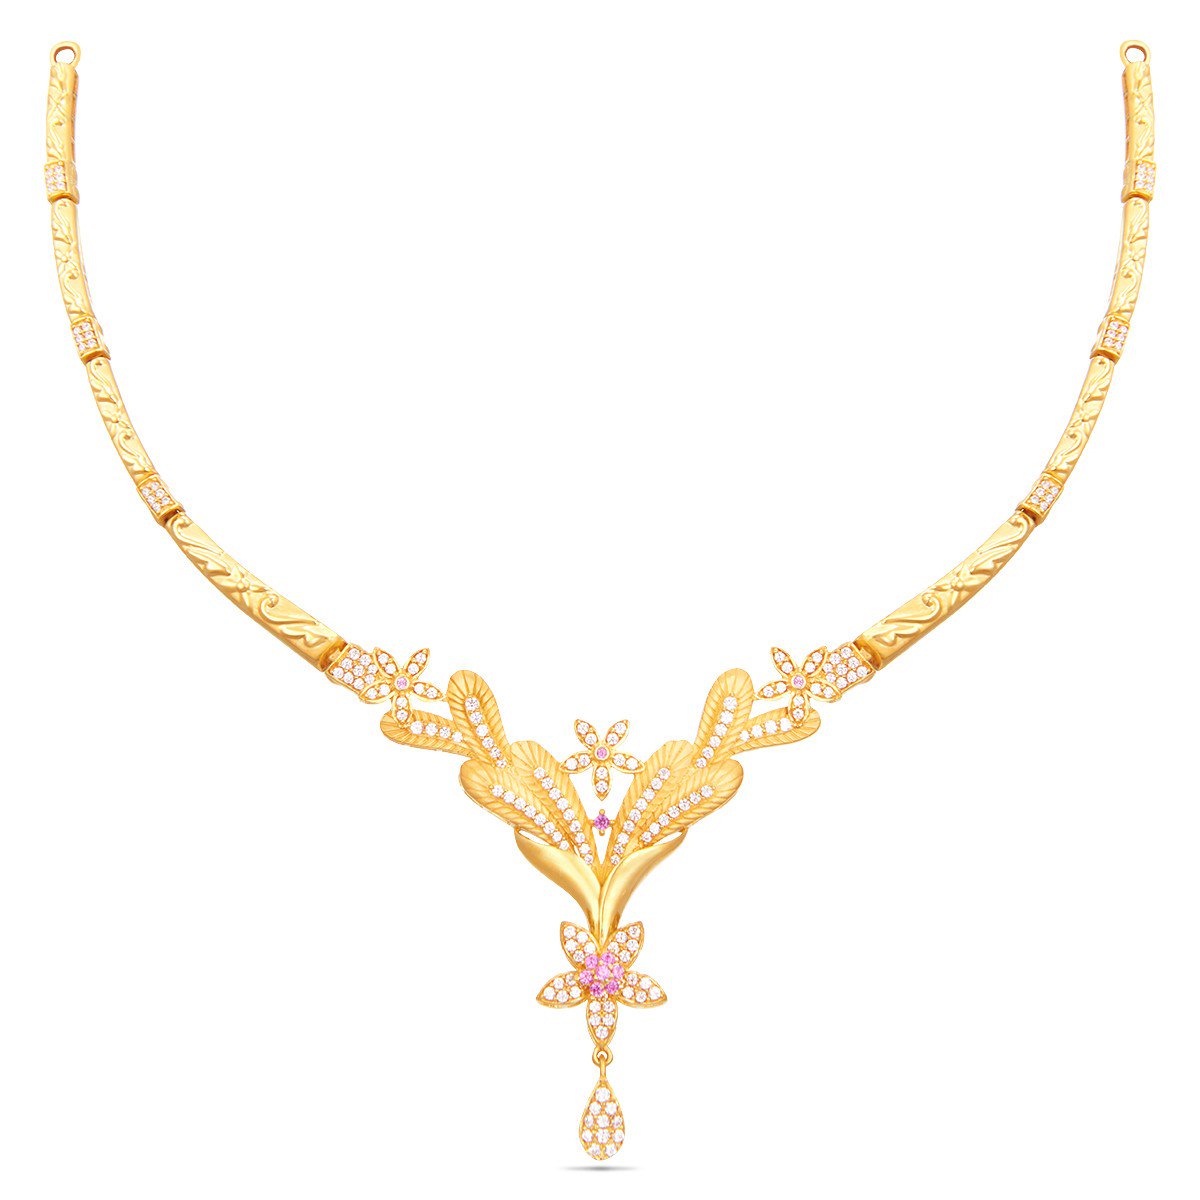 30 Ultimate Gold Necklace Designs in 30 Grams • South India Jewels